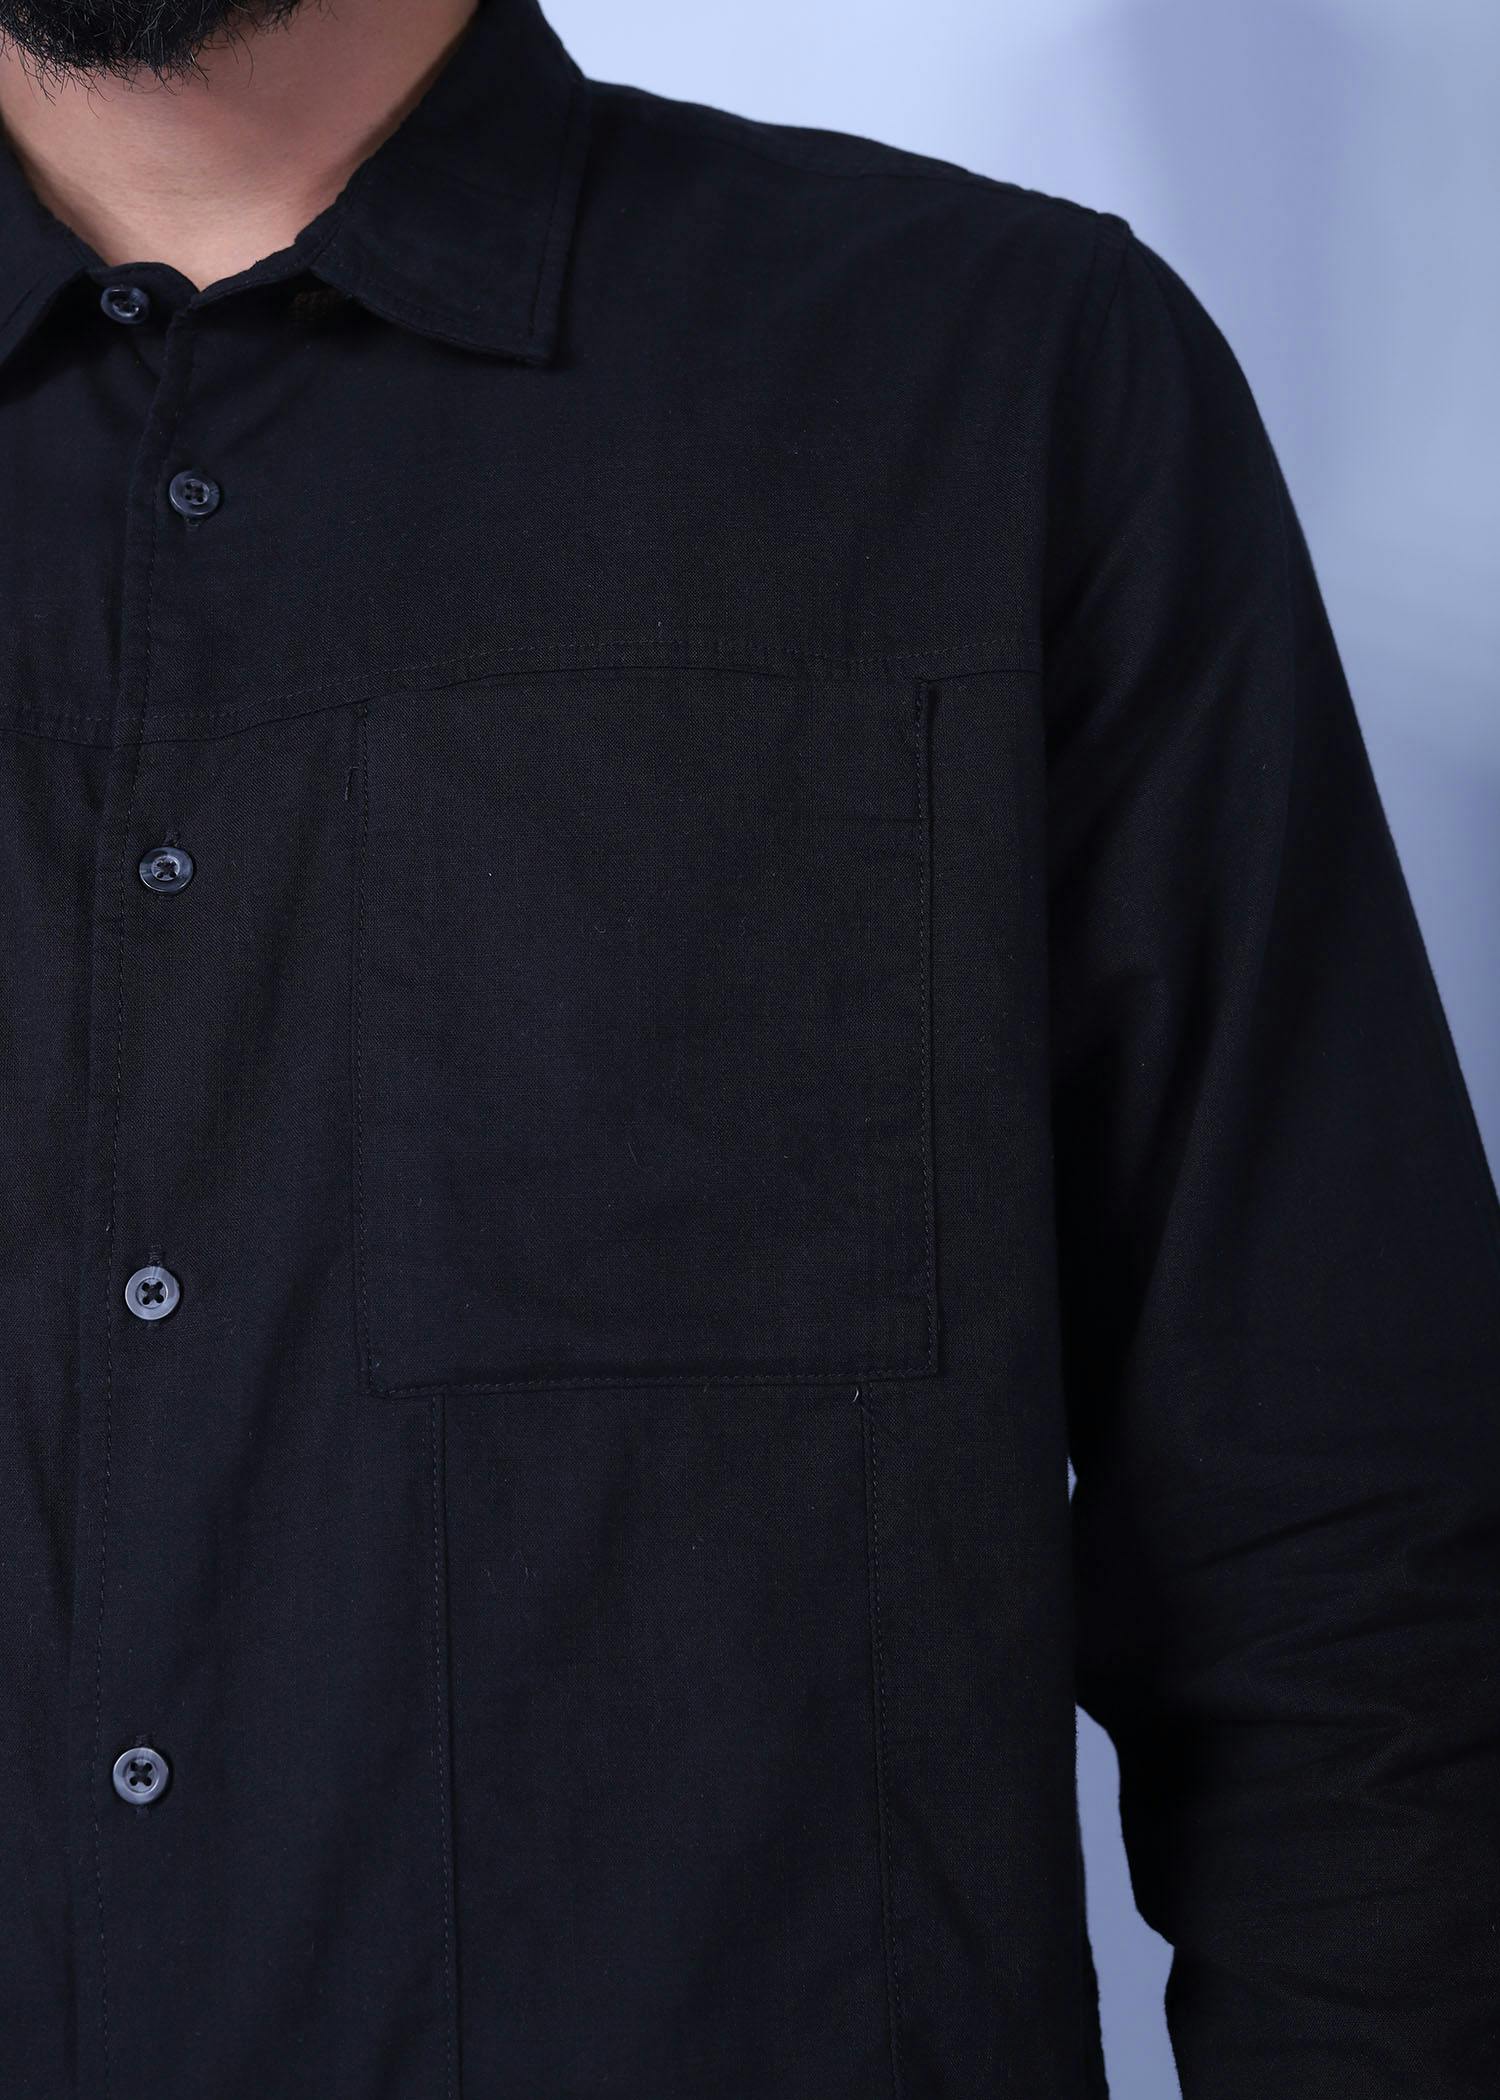 istanbul xviii ls shirt black color close front view